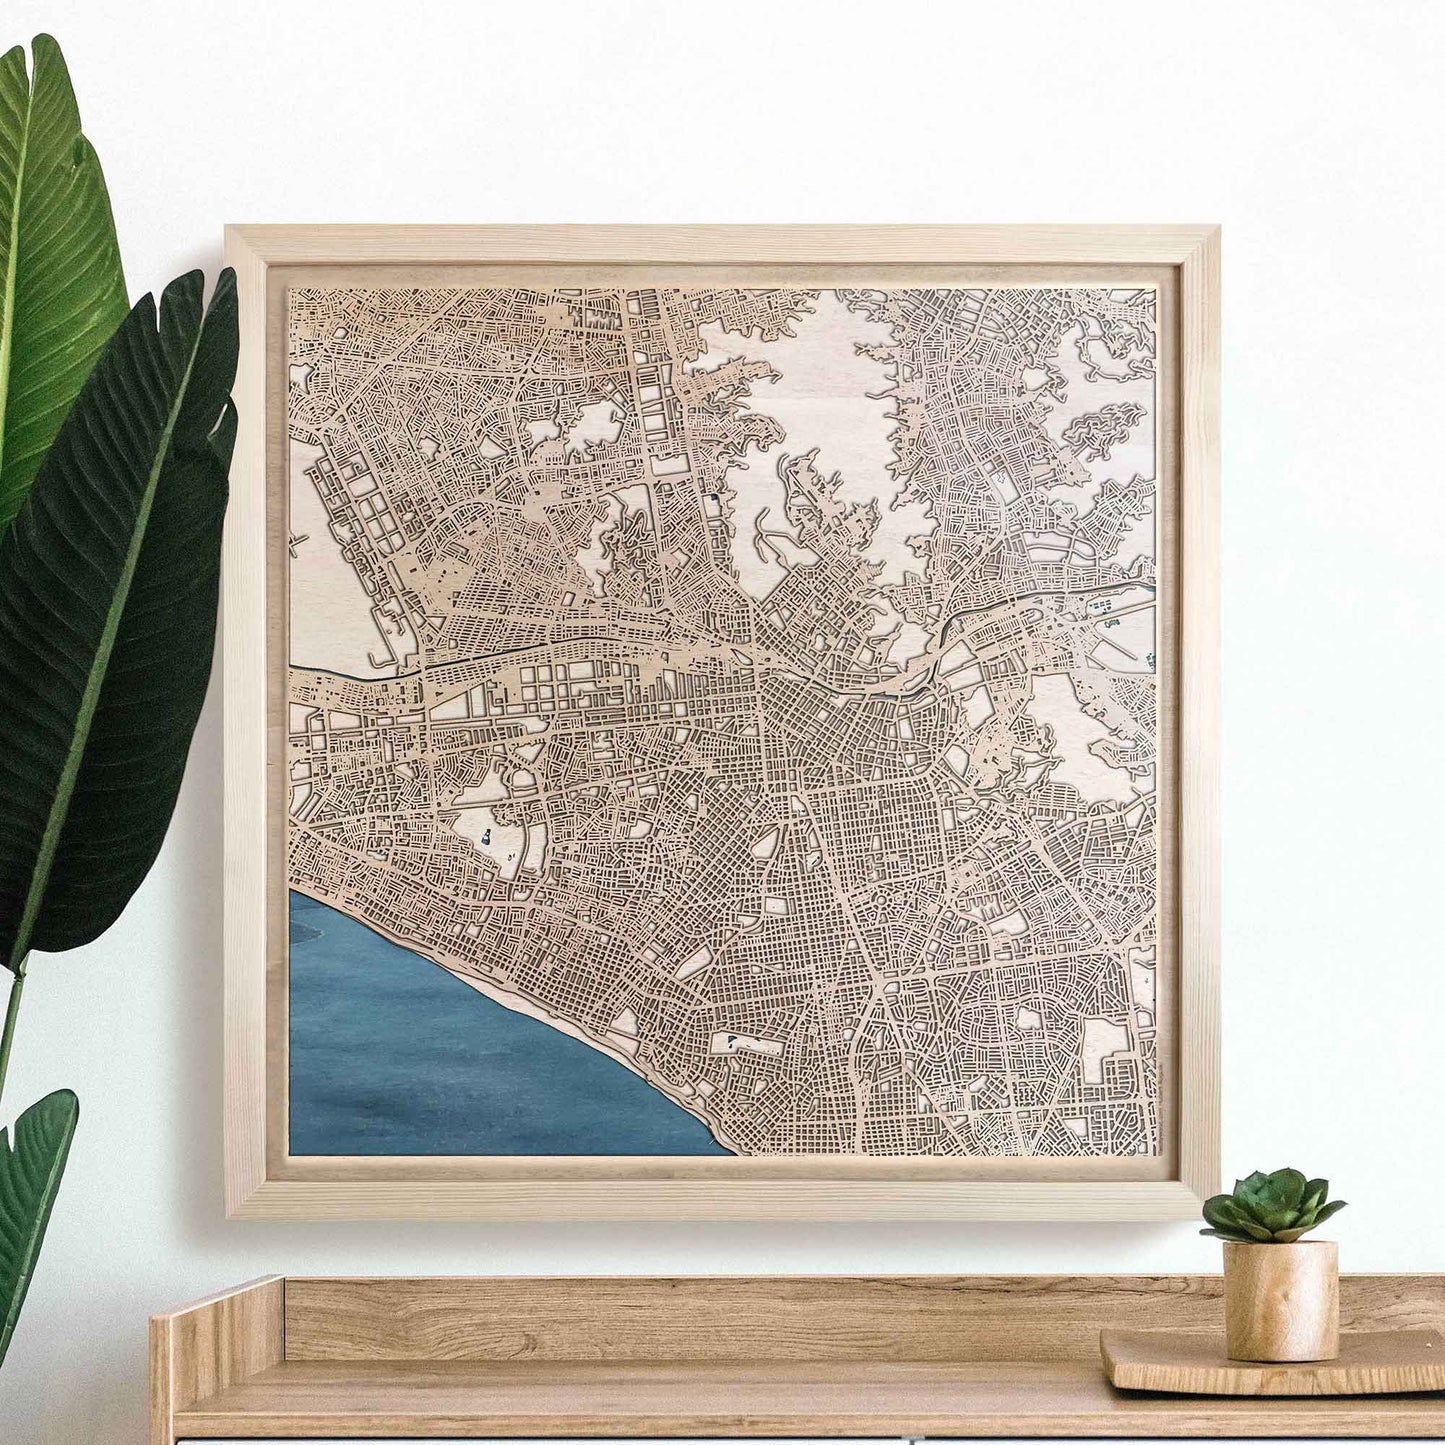 Lima Wooden Map by CityWood - Custom Wood Map Art - Unique Laser Cut Engraved - Anniversary Gift